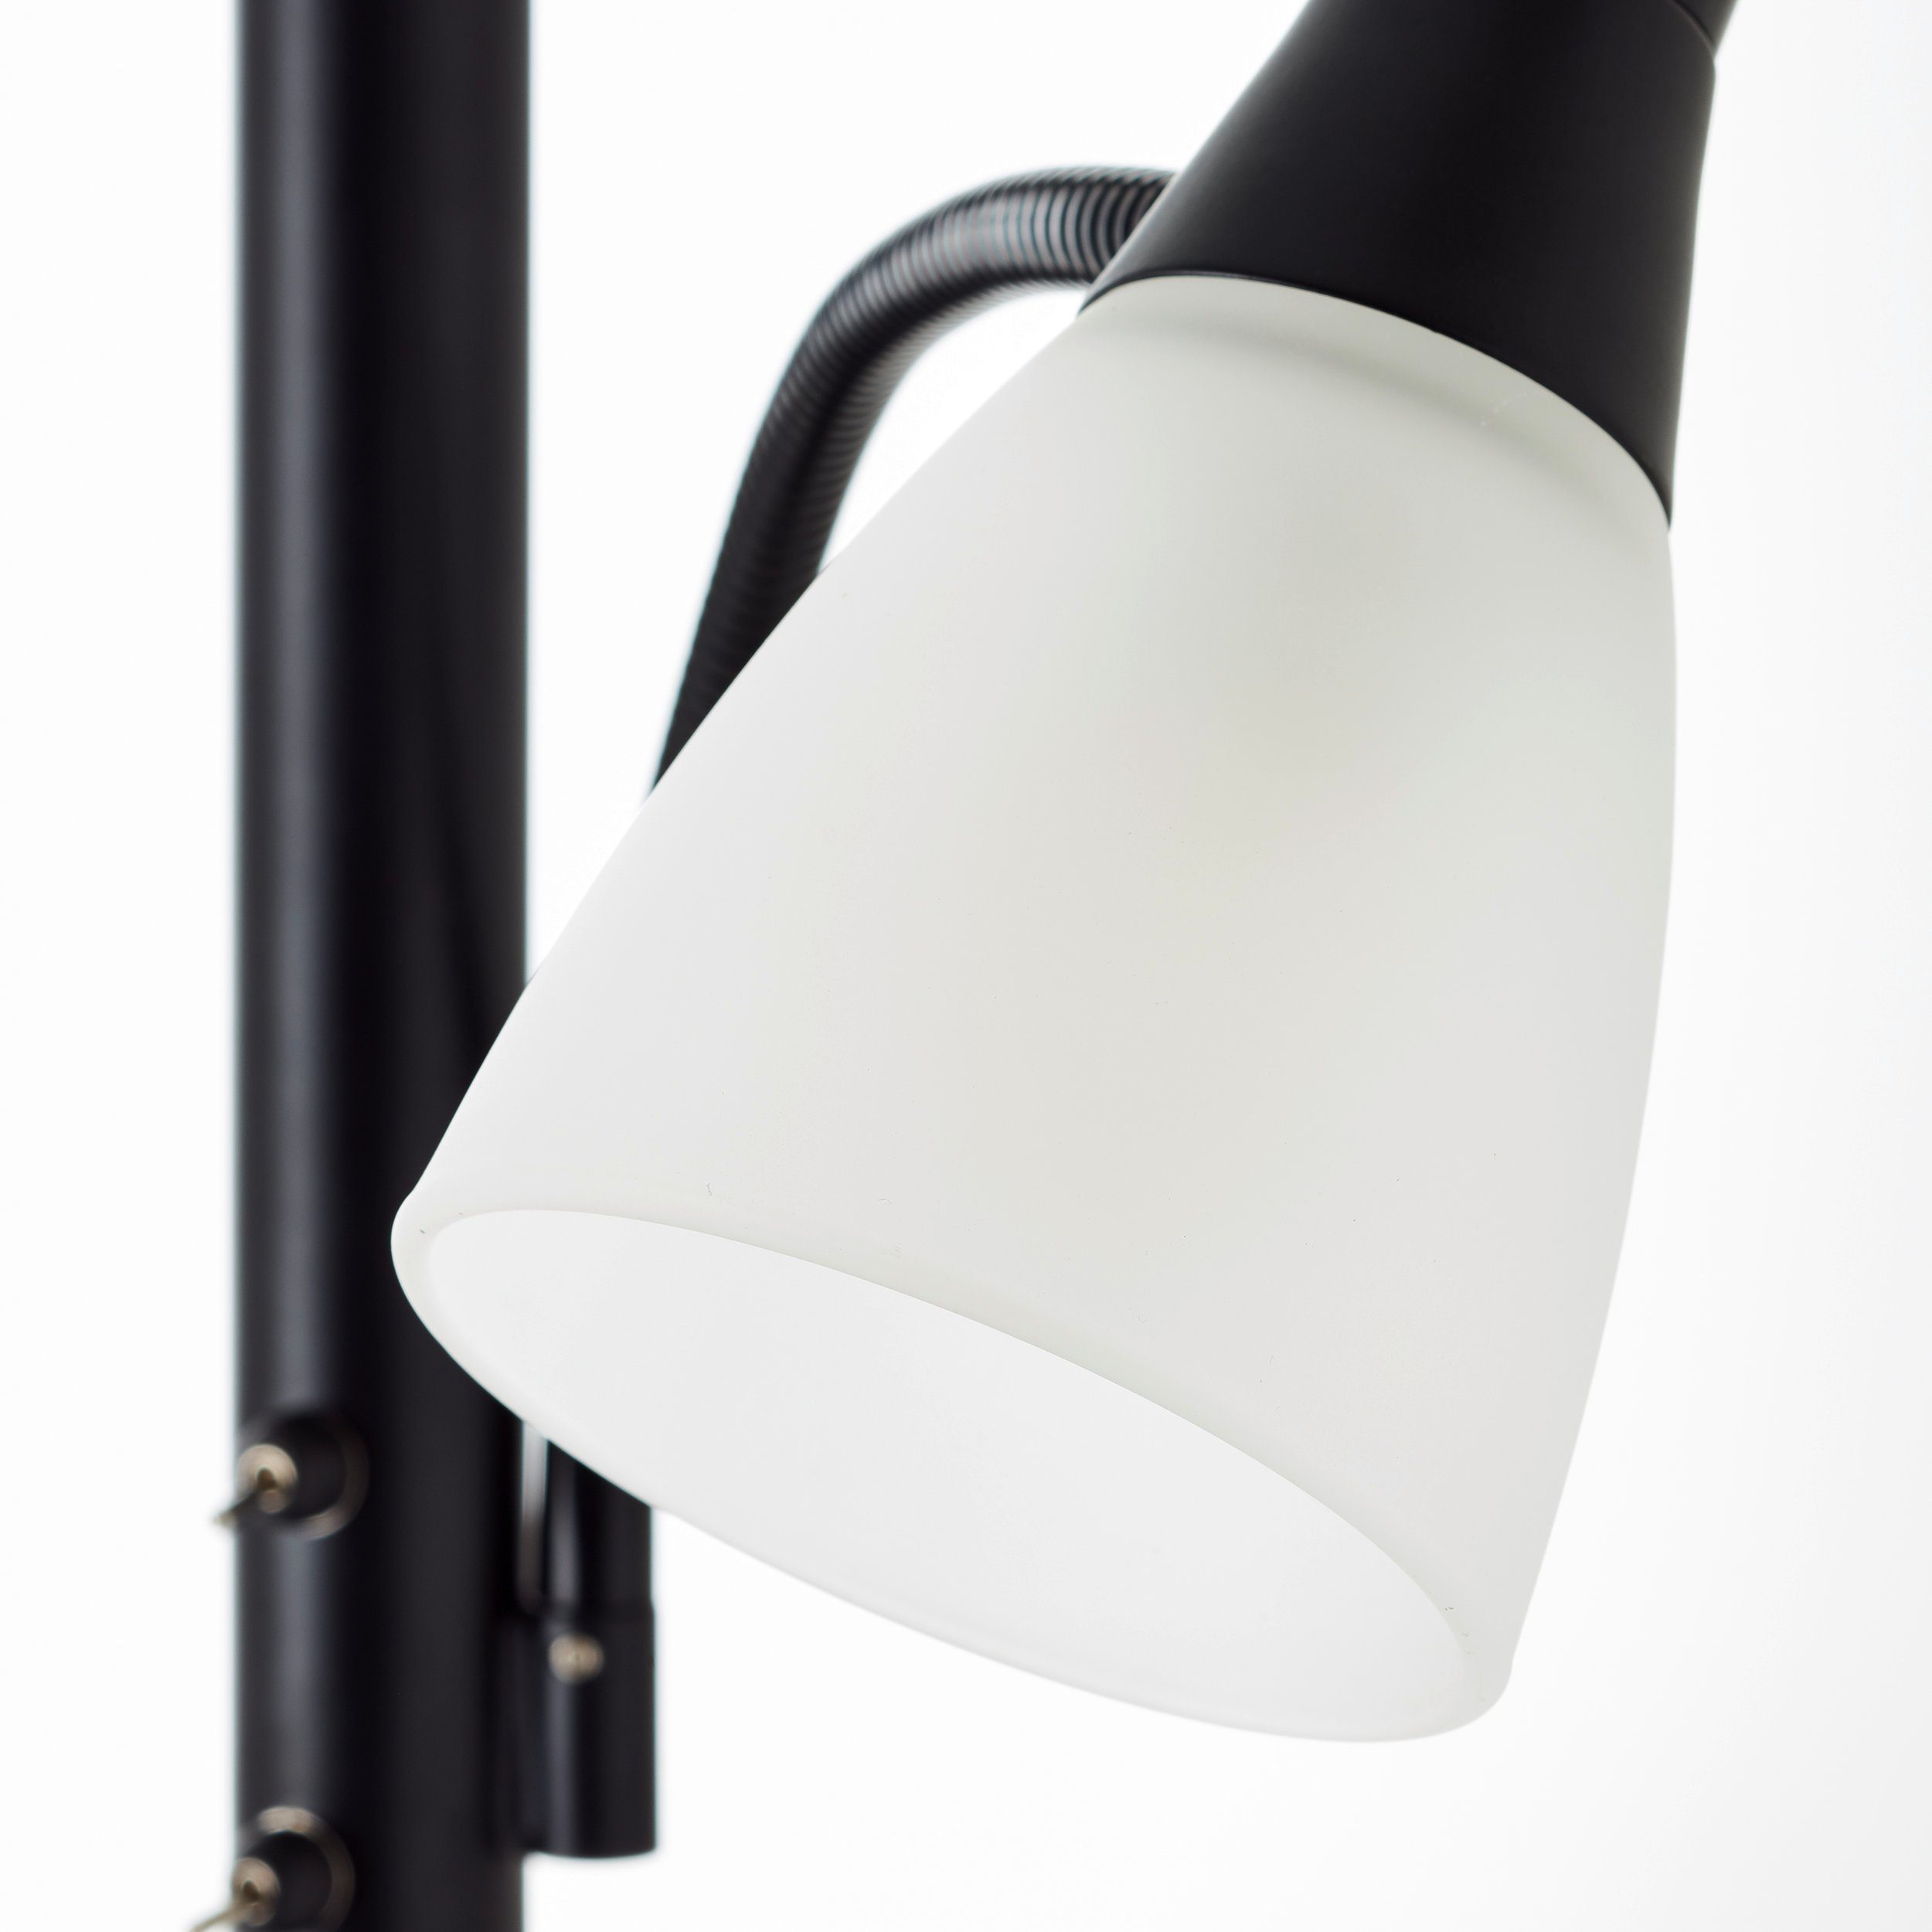 Brilliant Stehlampe W Lucy, 5 E27, LED schwarz, Lucy A60, Deckenfluter Metall/Glas, 1x Lesearm